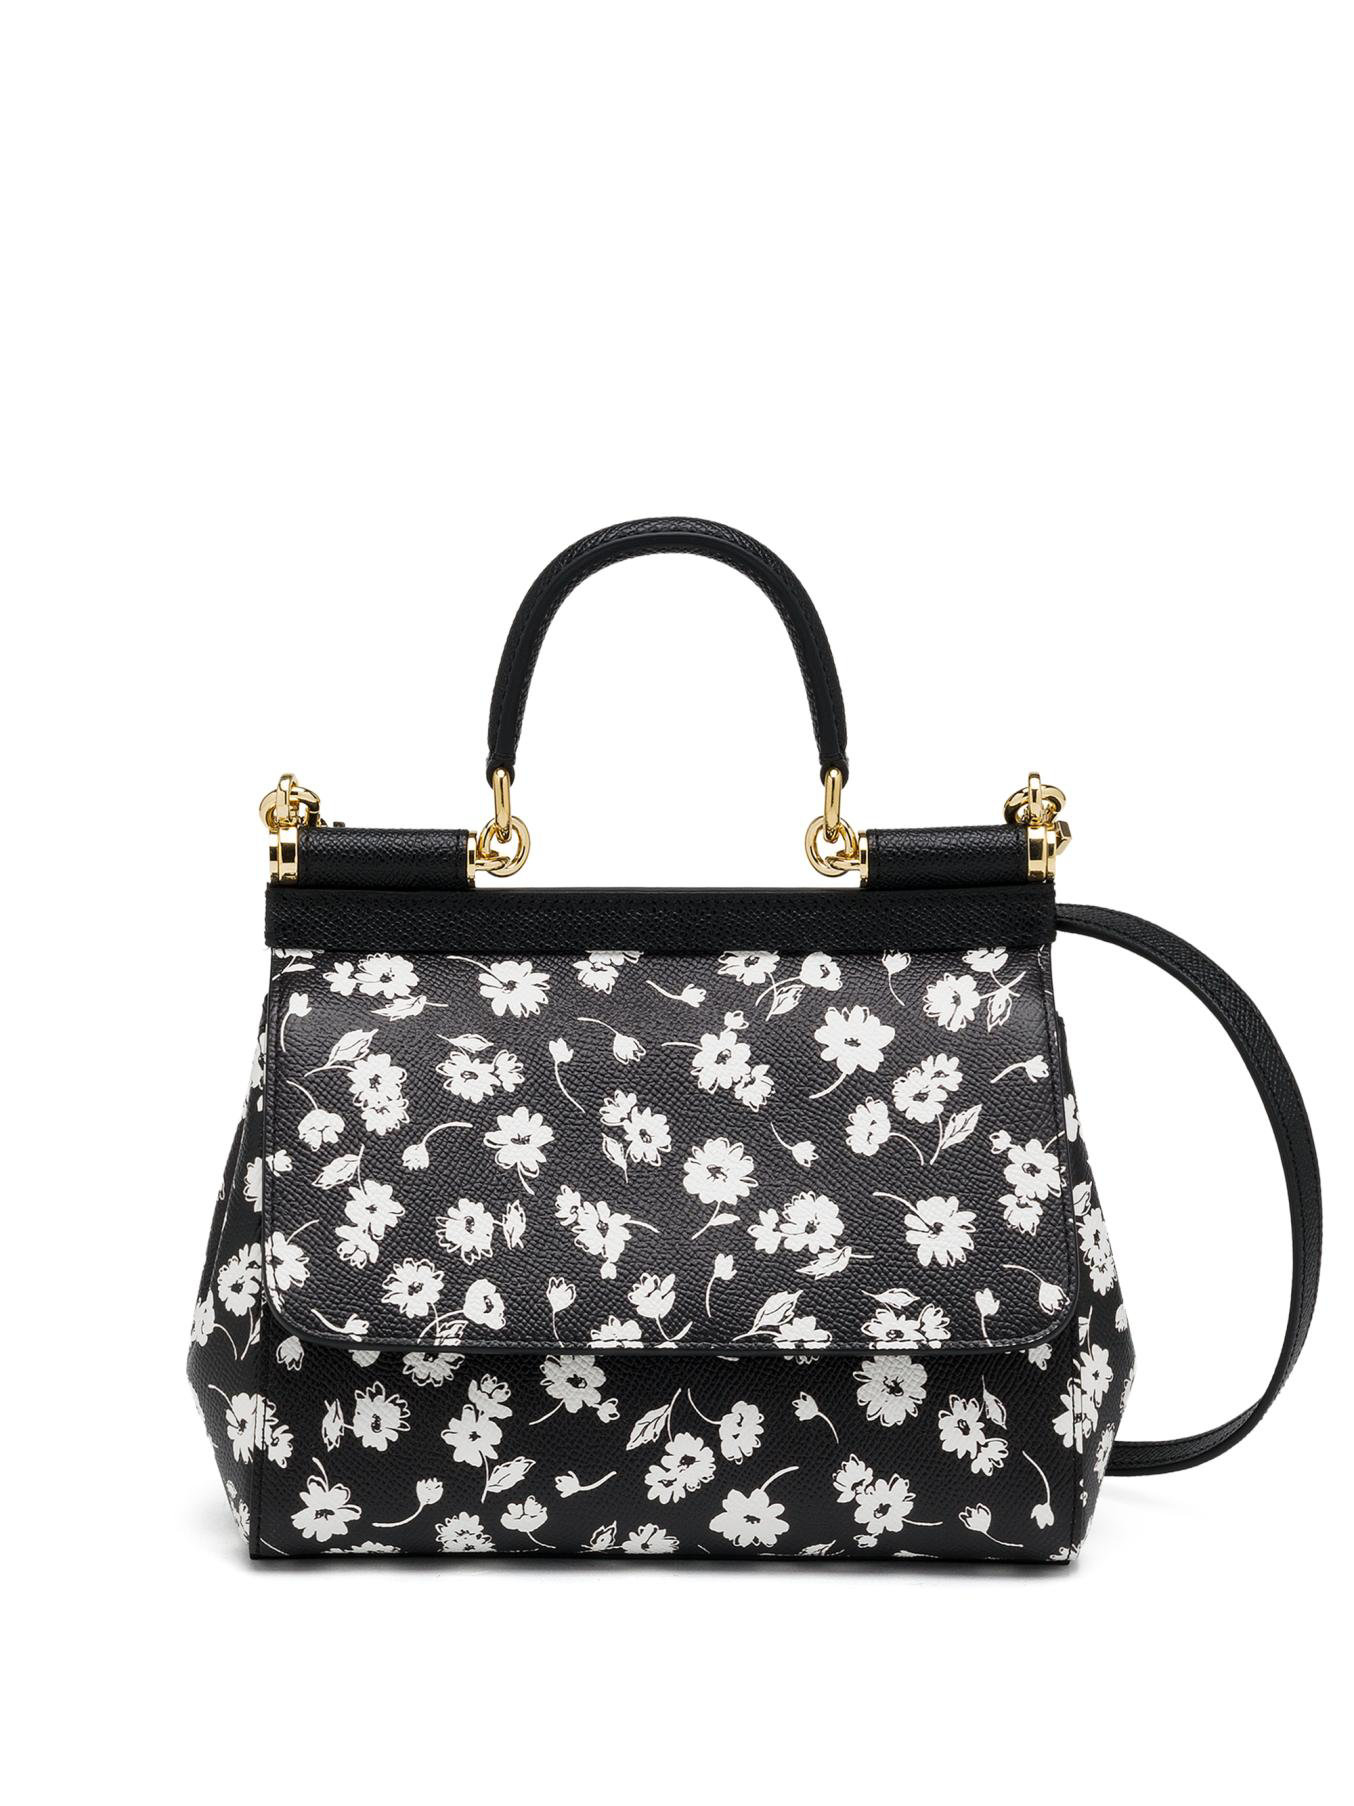 Dolce & gabbana Small Floral 'sicily' Tote in Black | Lyst